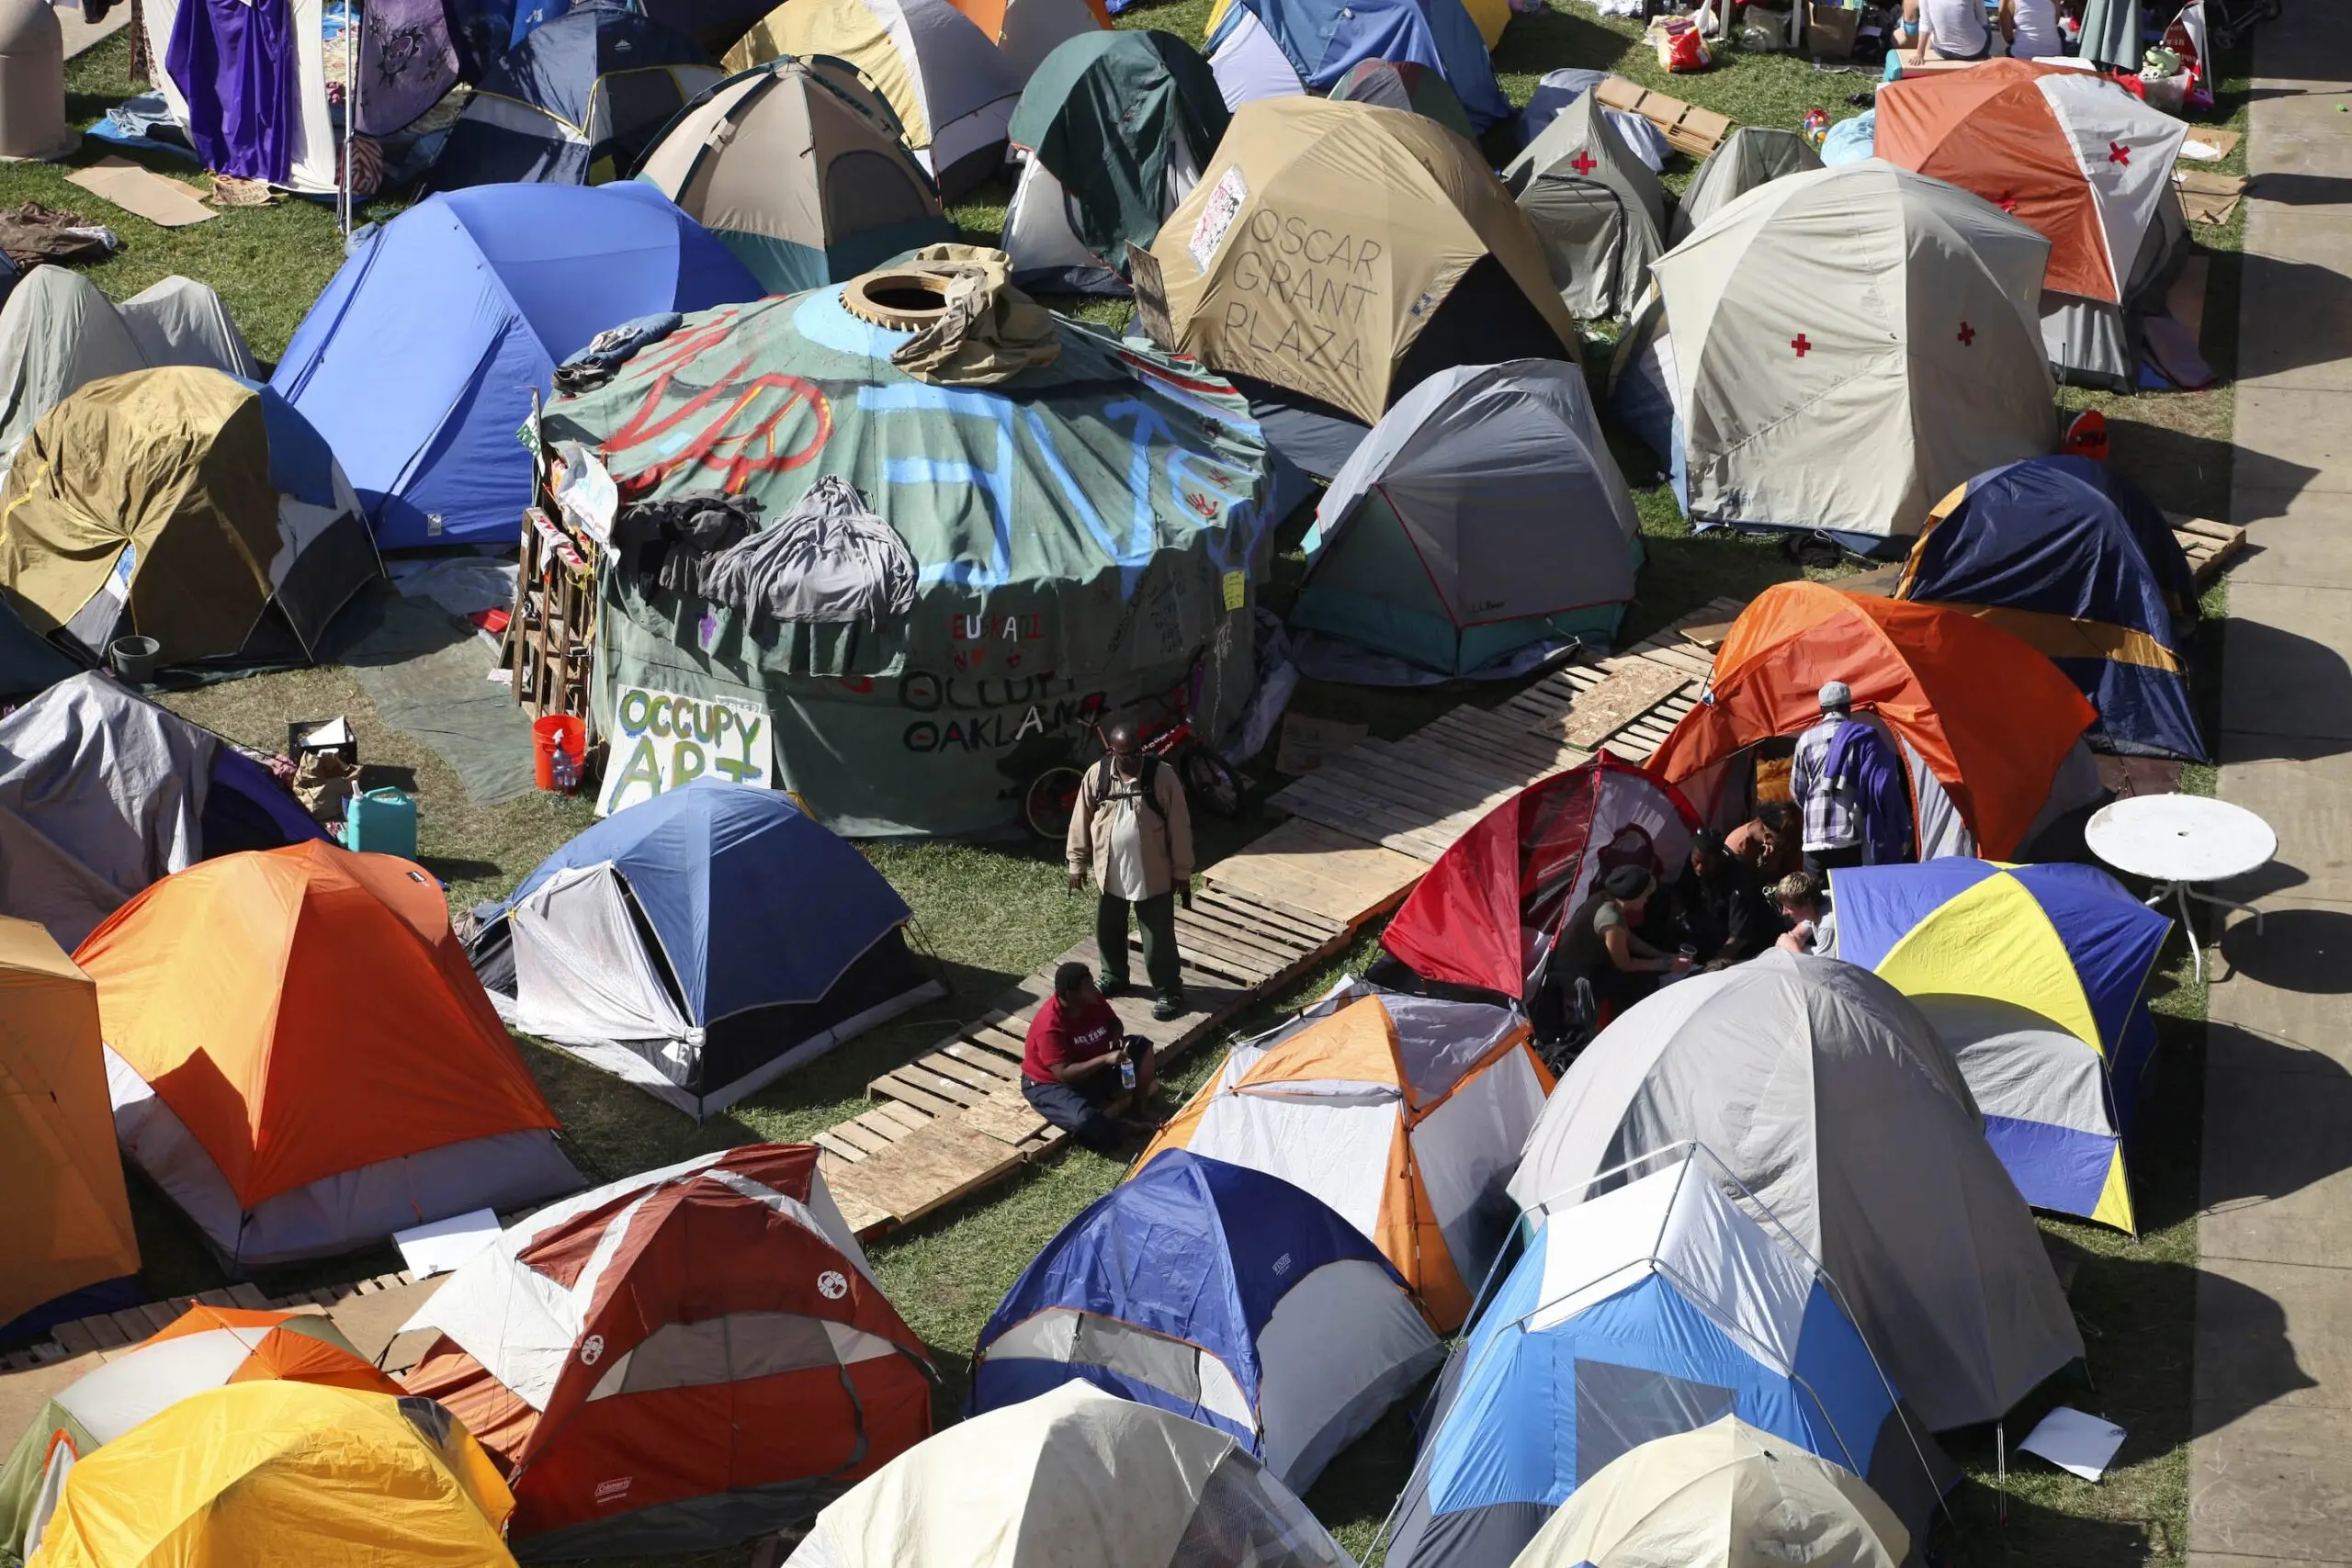 People walk among tents at the Occupy Oakland protest in October 2011.